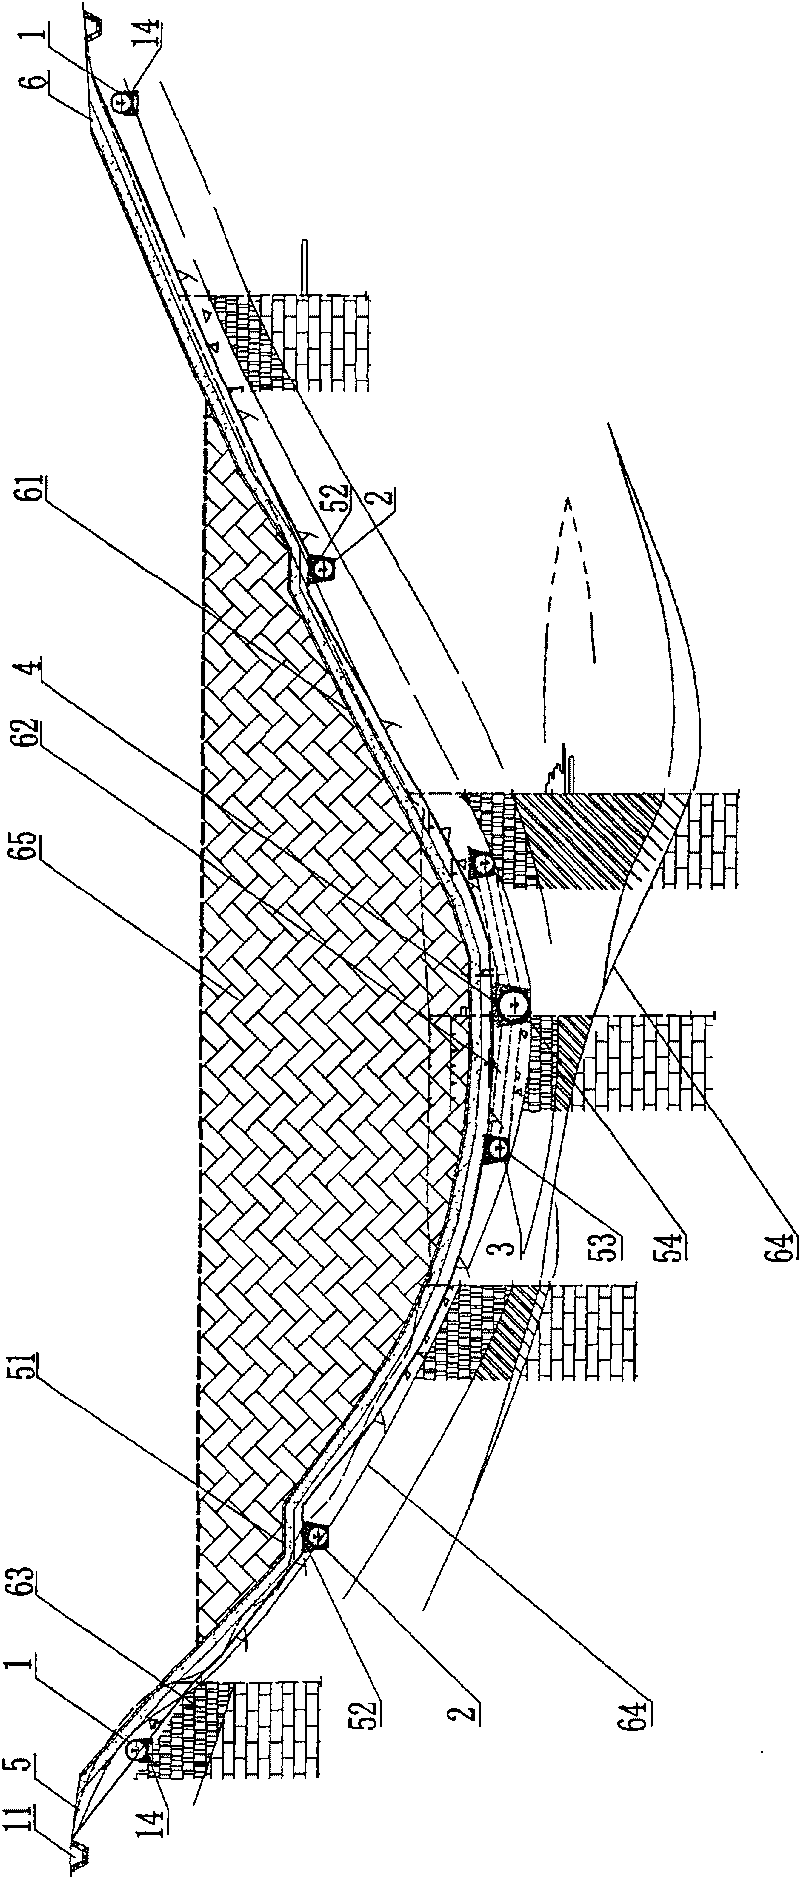 Stereo drainage system structure for landfill underground water